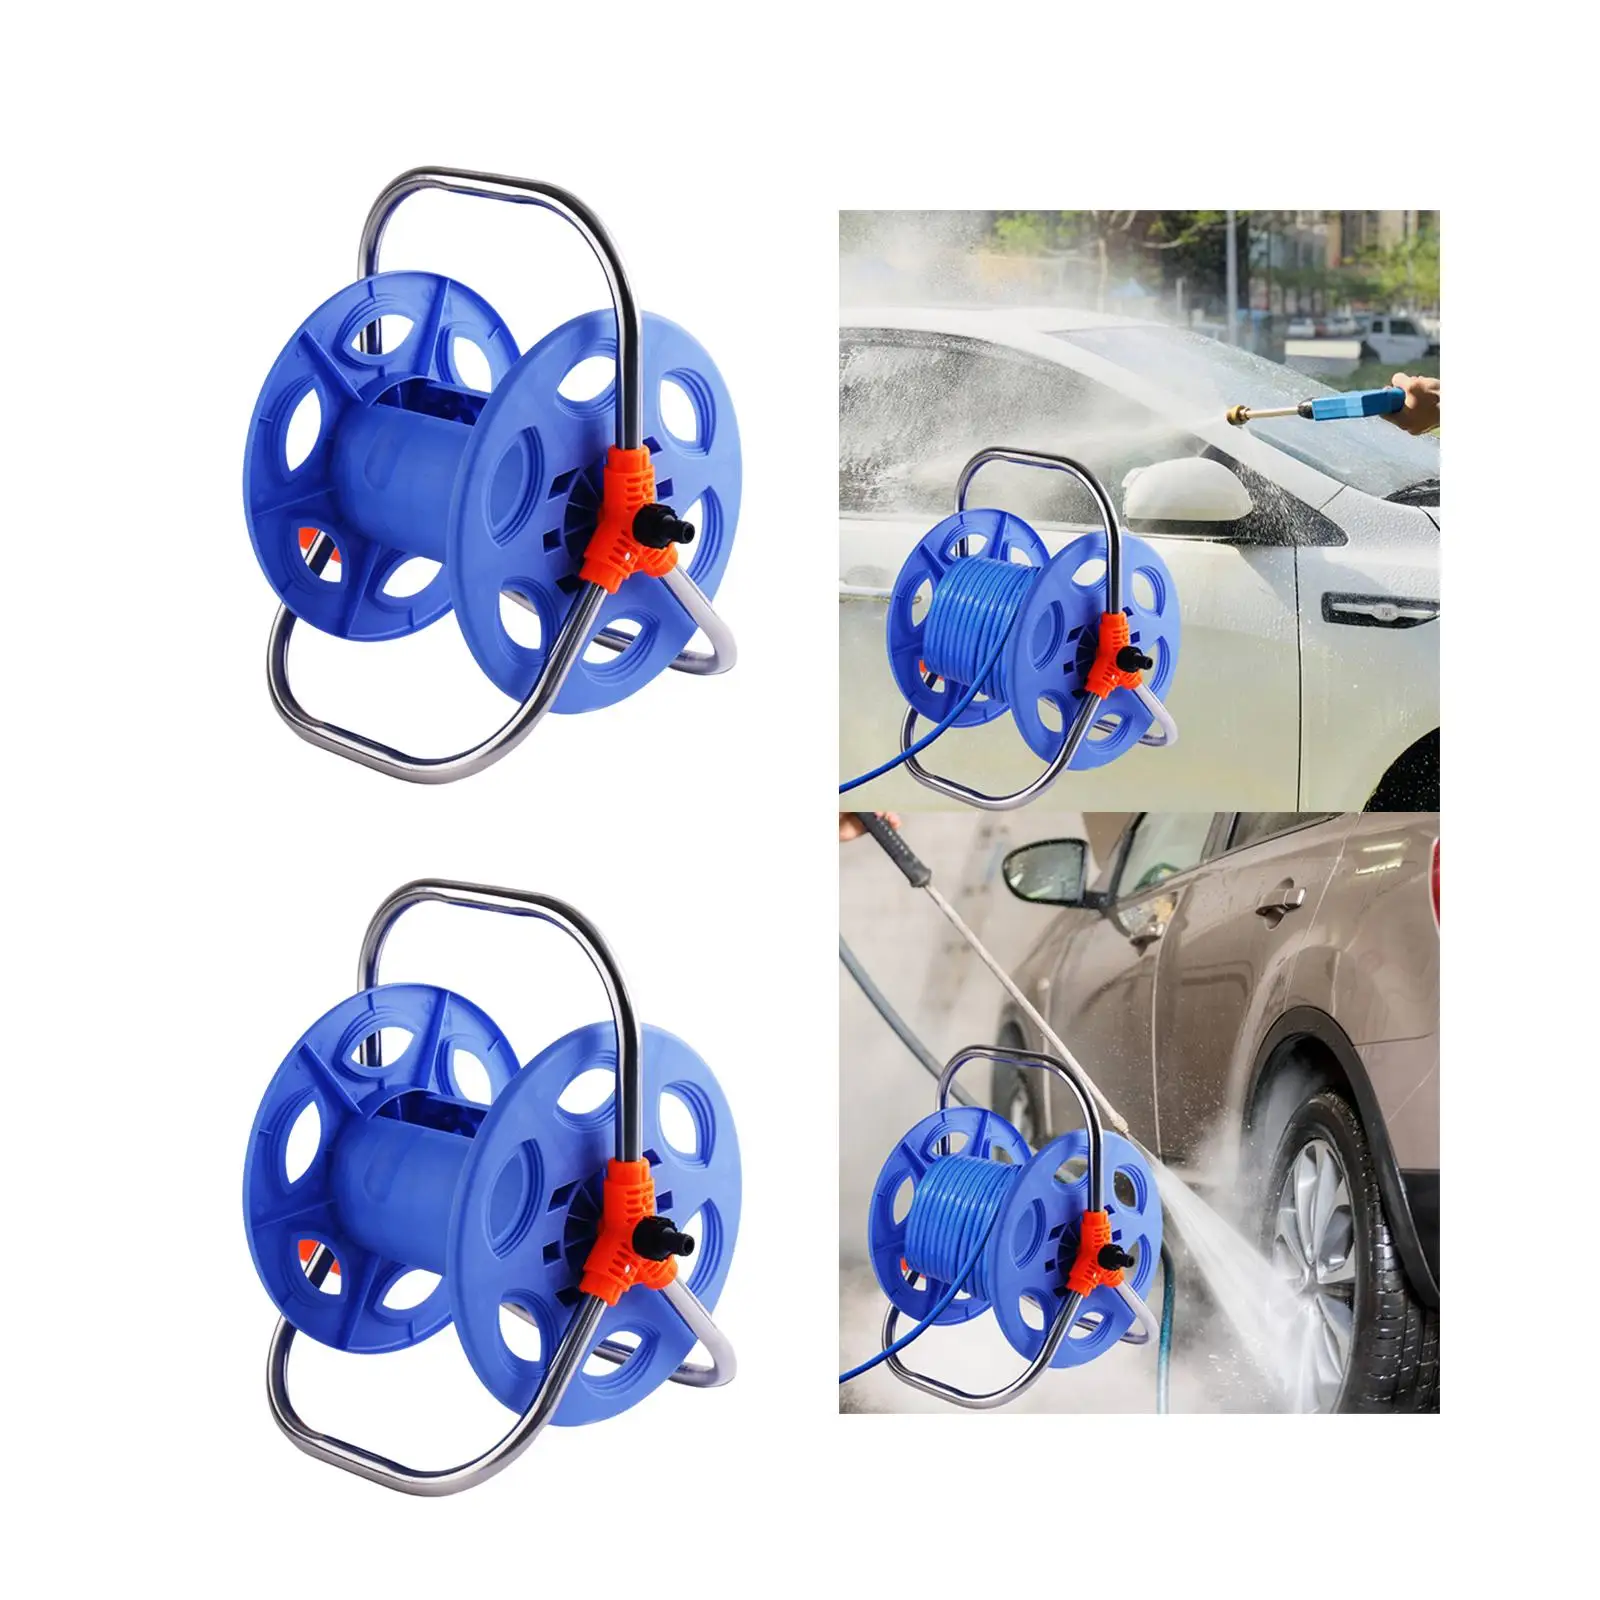 Water Hose Reel Garden Hose stand for Irrigation System Car Wash Lawn -  AliExpress